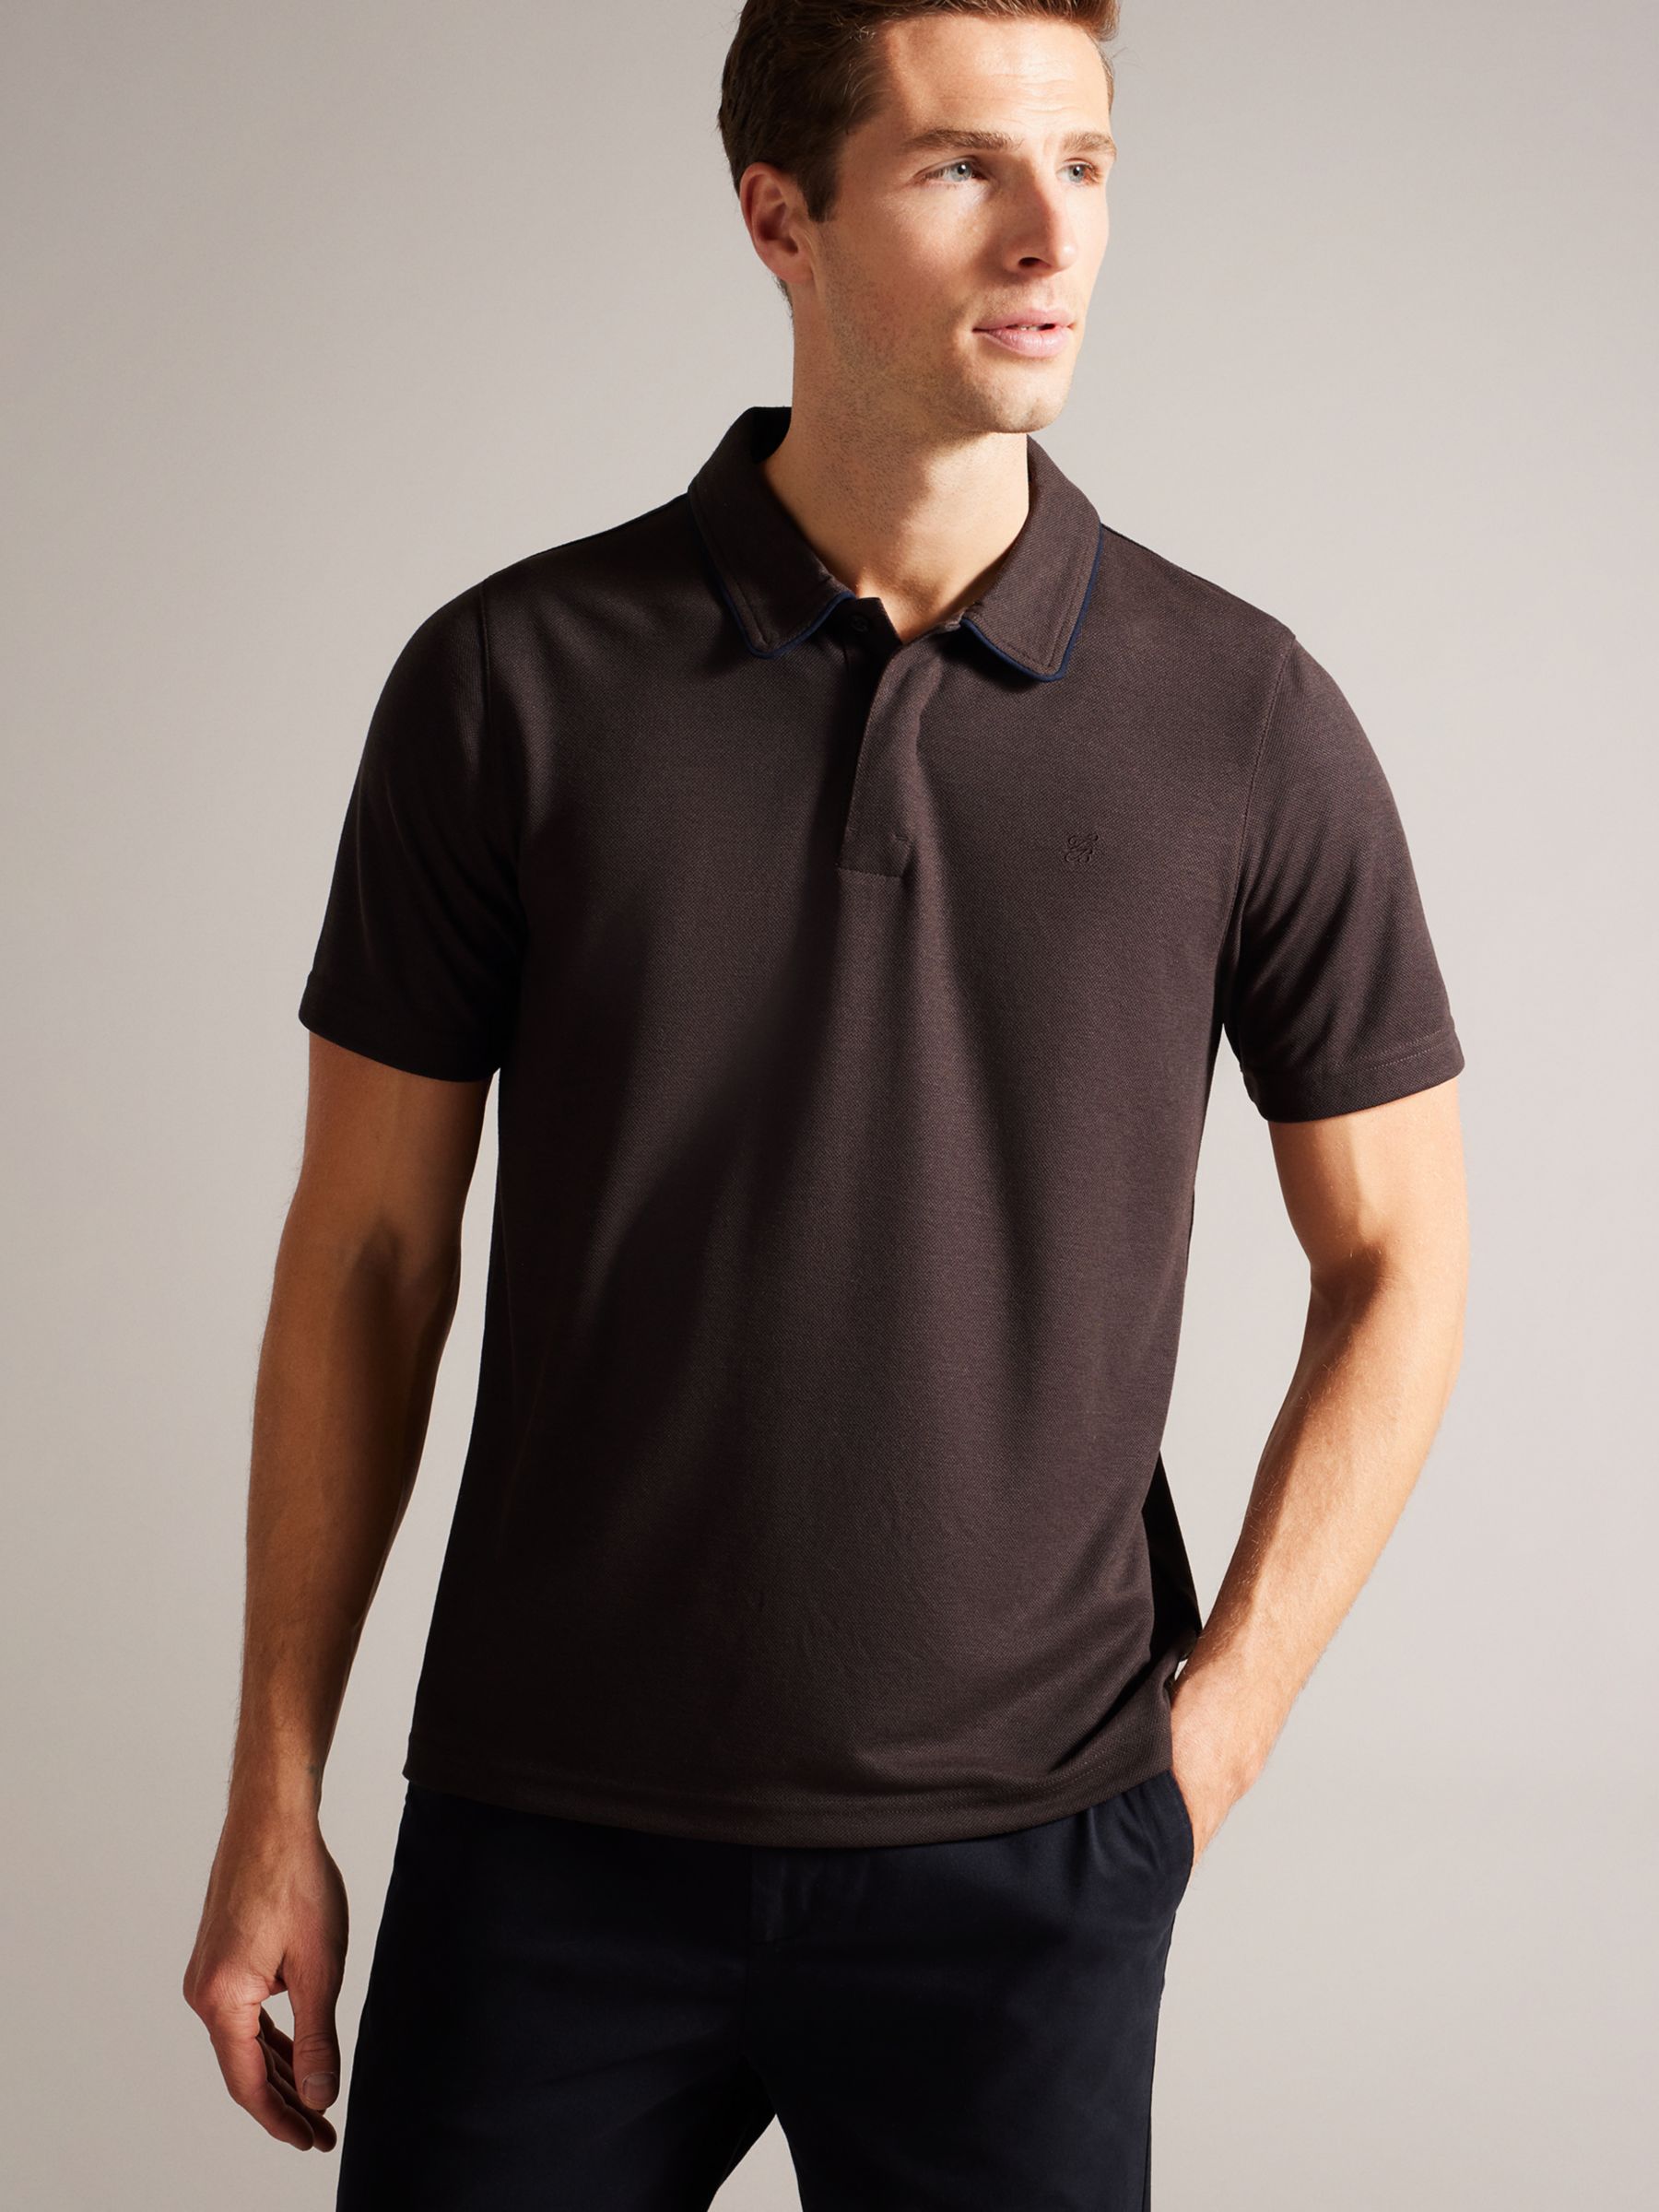 Ted Baker Aroue Short Sleeve Auede Trim Polo Shirt, Brown Mid, XS